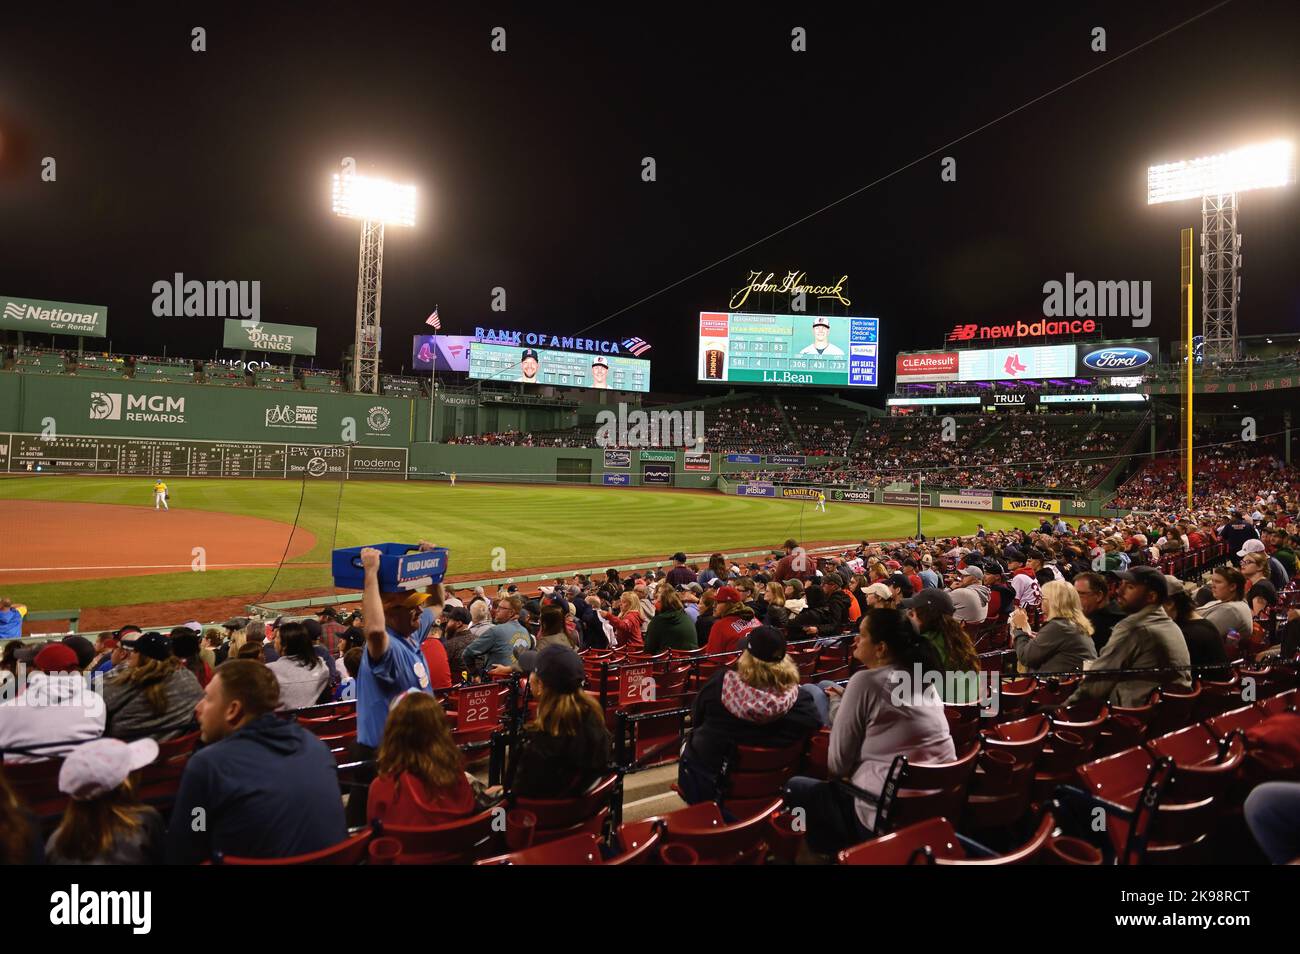 Boston, Massachusetts, USA. Fans on game night at Fenway Park. Beyond the 'triangle' in the outfield are modern, electronic message boards. Stock Photo